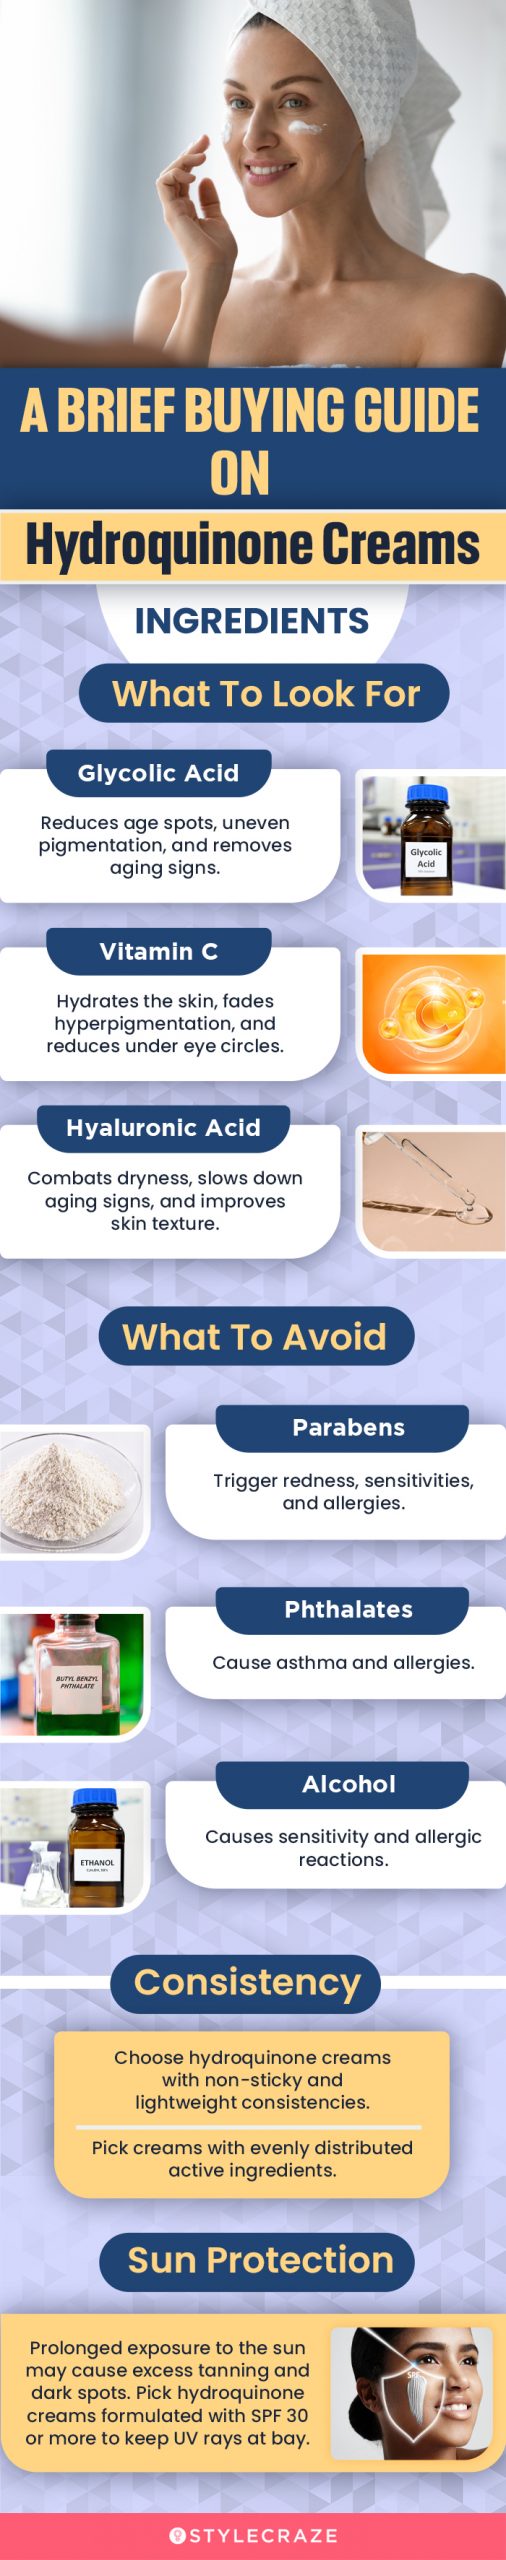 A Brief Buying Guide On Hydroquinone Creams